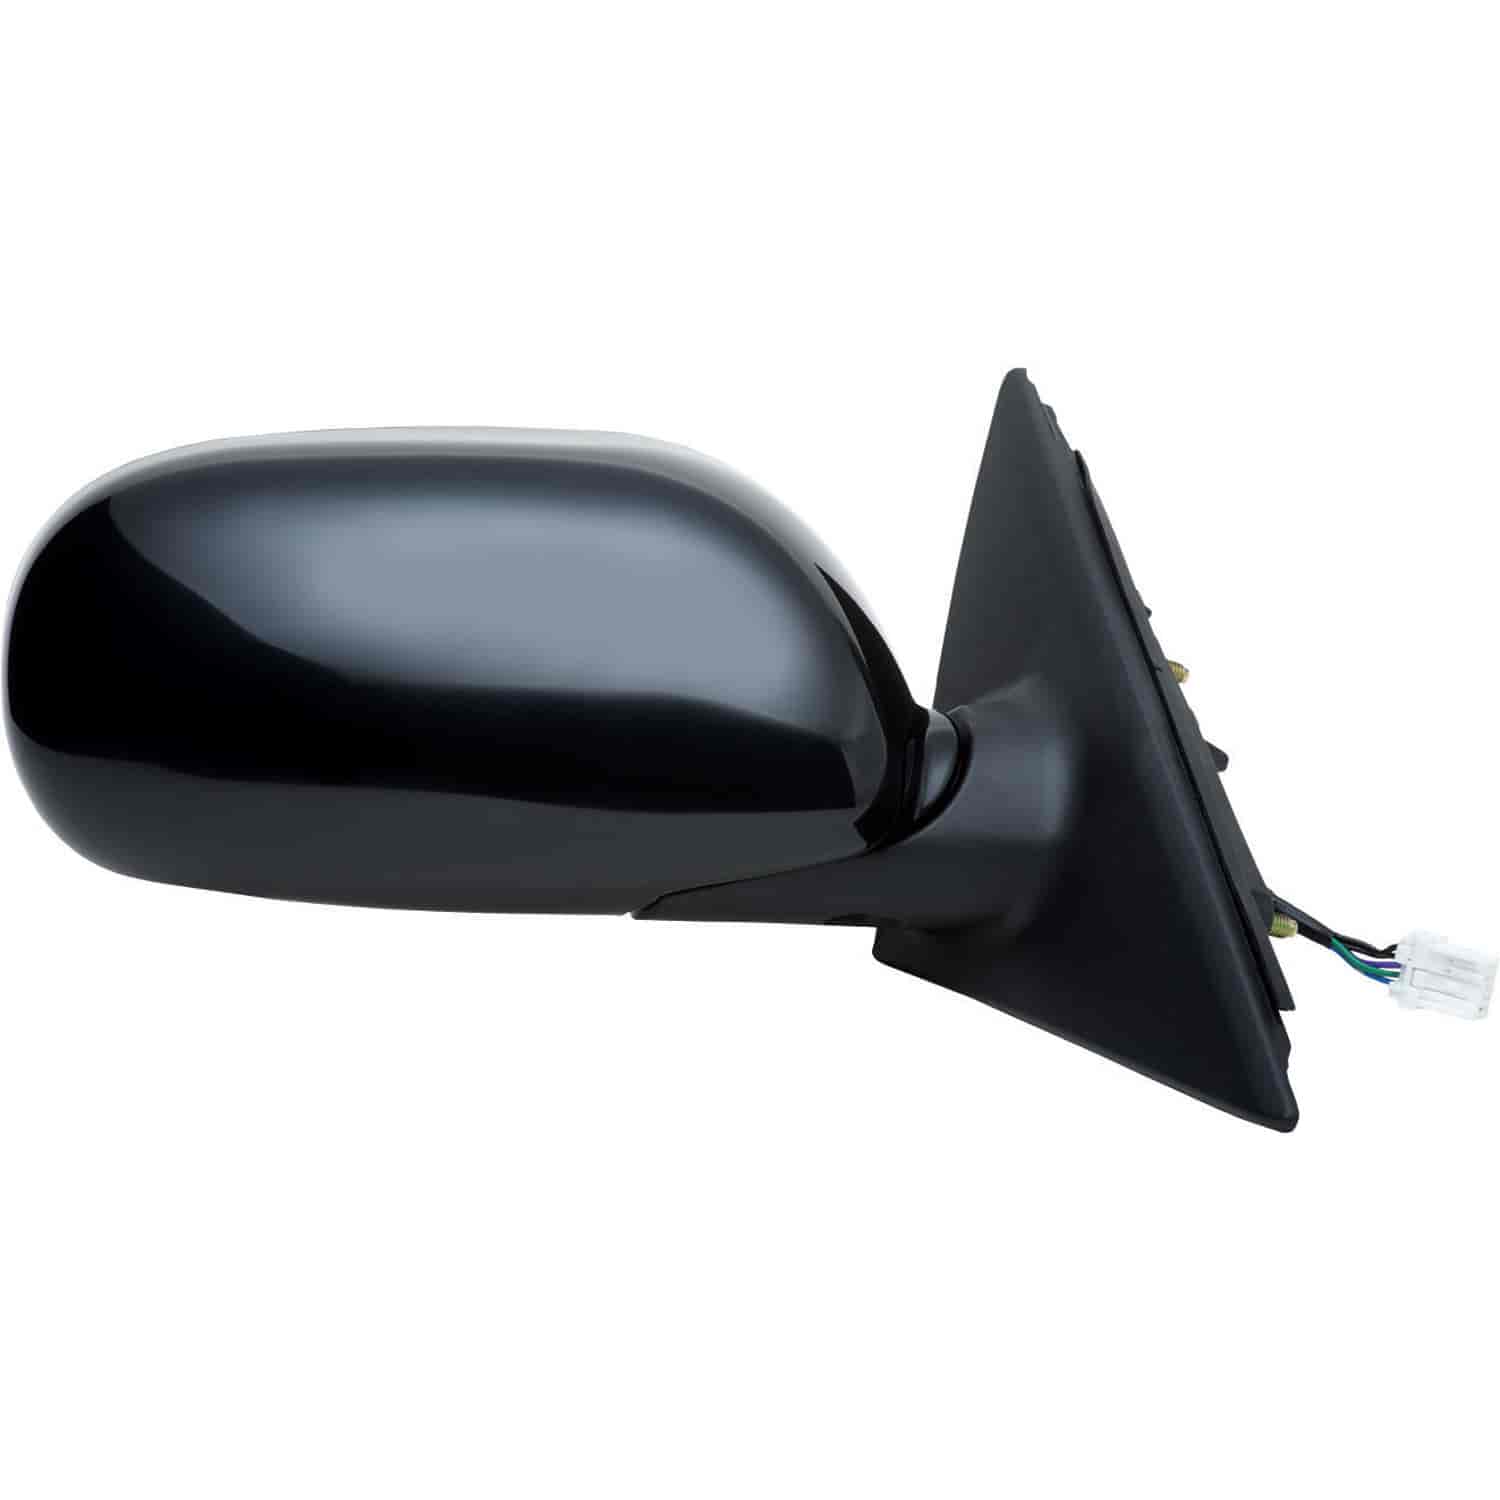 OEM Style Replacement mirror for 03-06 INFINITY G35 Sedan passenger side mirror tested to fit and fu